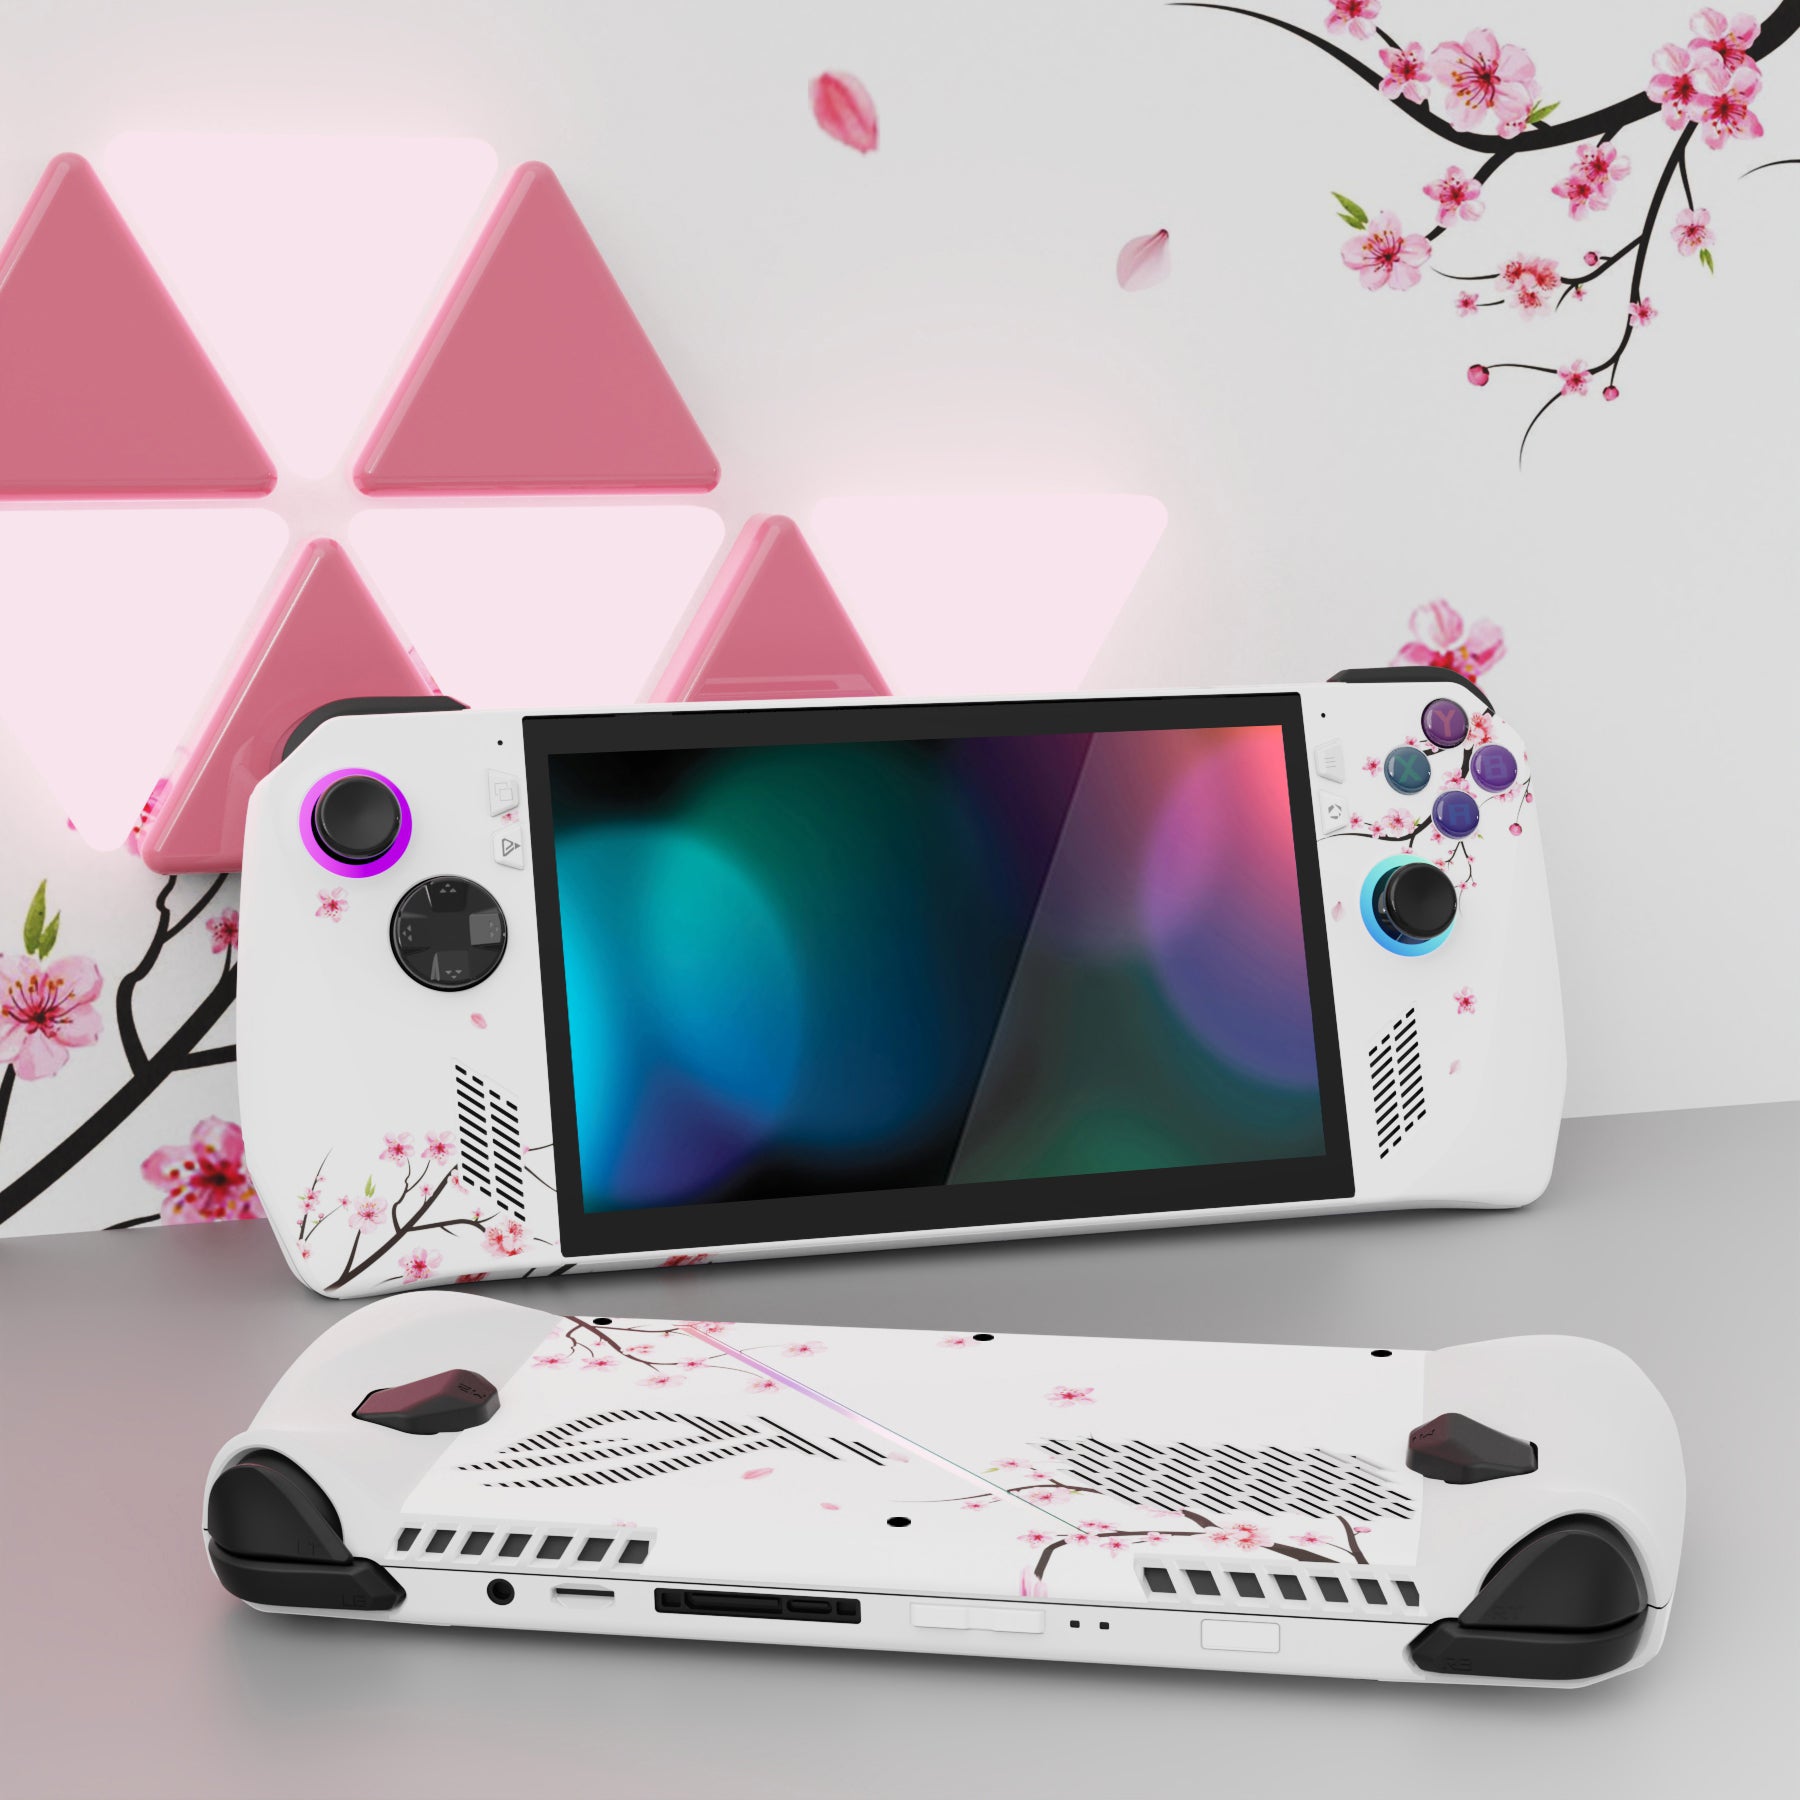 PlayVital Falling Cherry Blossom Custom Stickers Vinyl Wraps Protective Skin Decal for ROG Ally Handheld Gaming Console - RGTM010 PlayVital